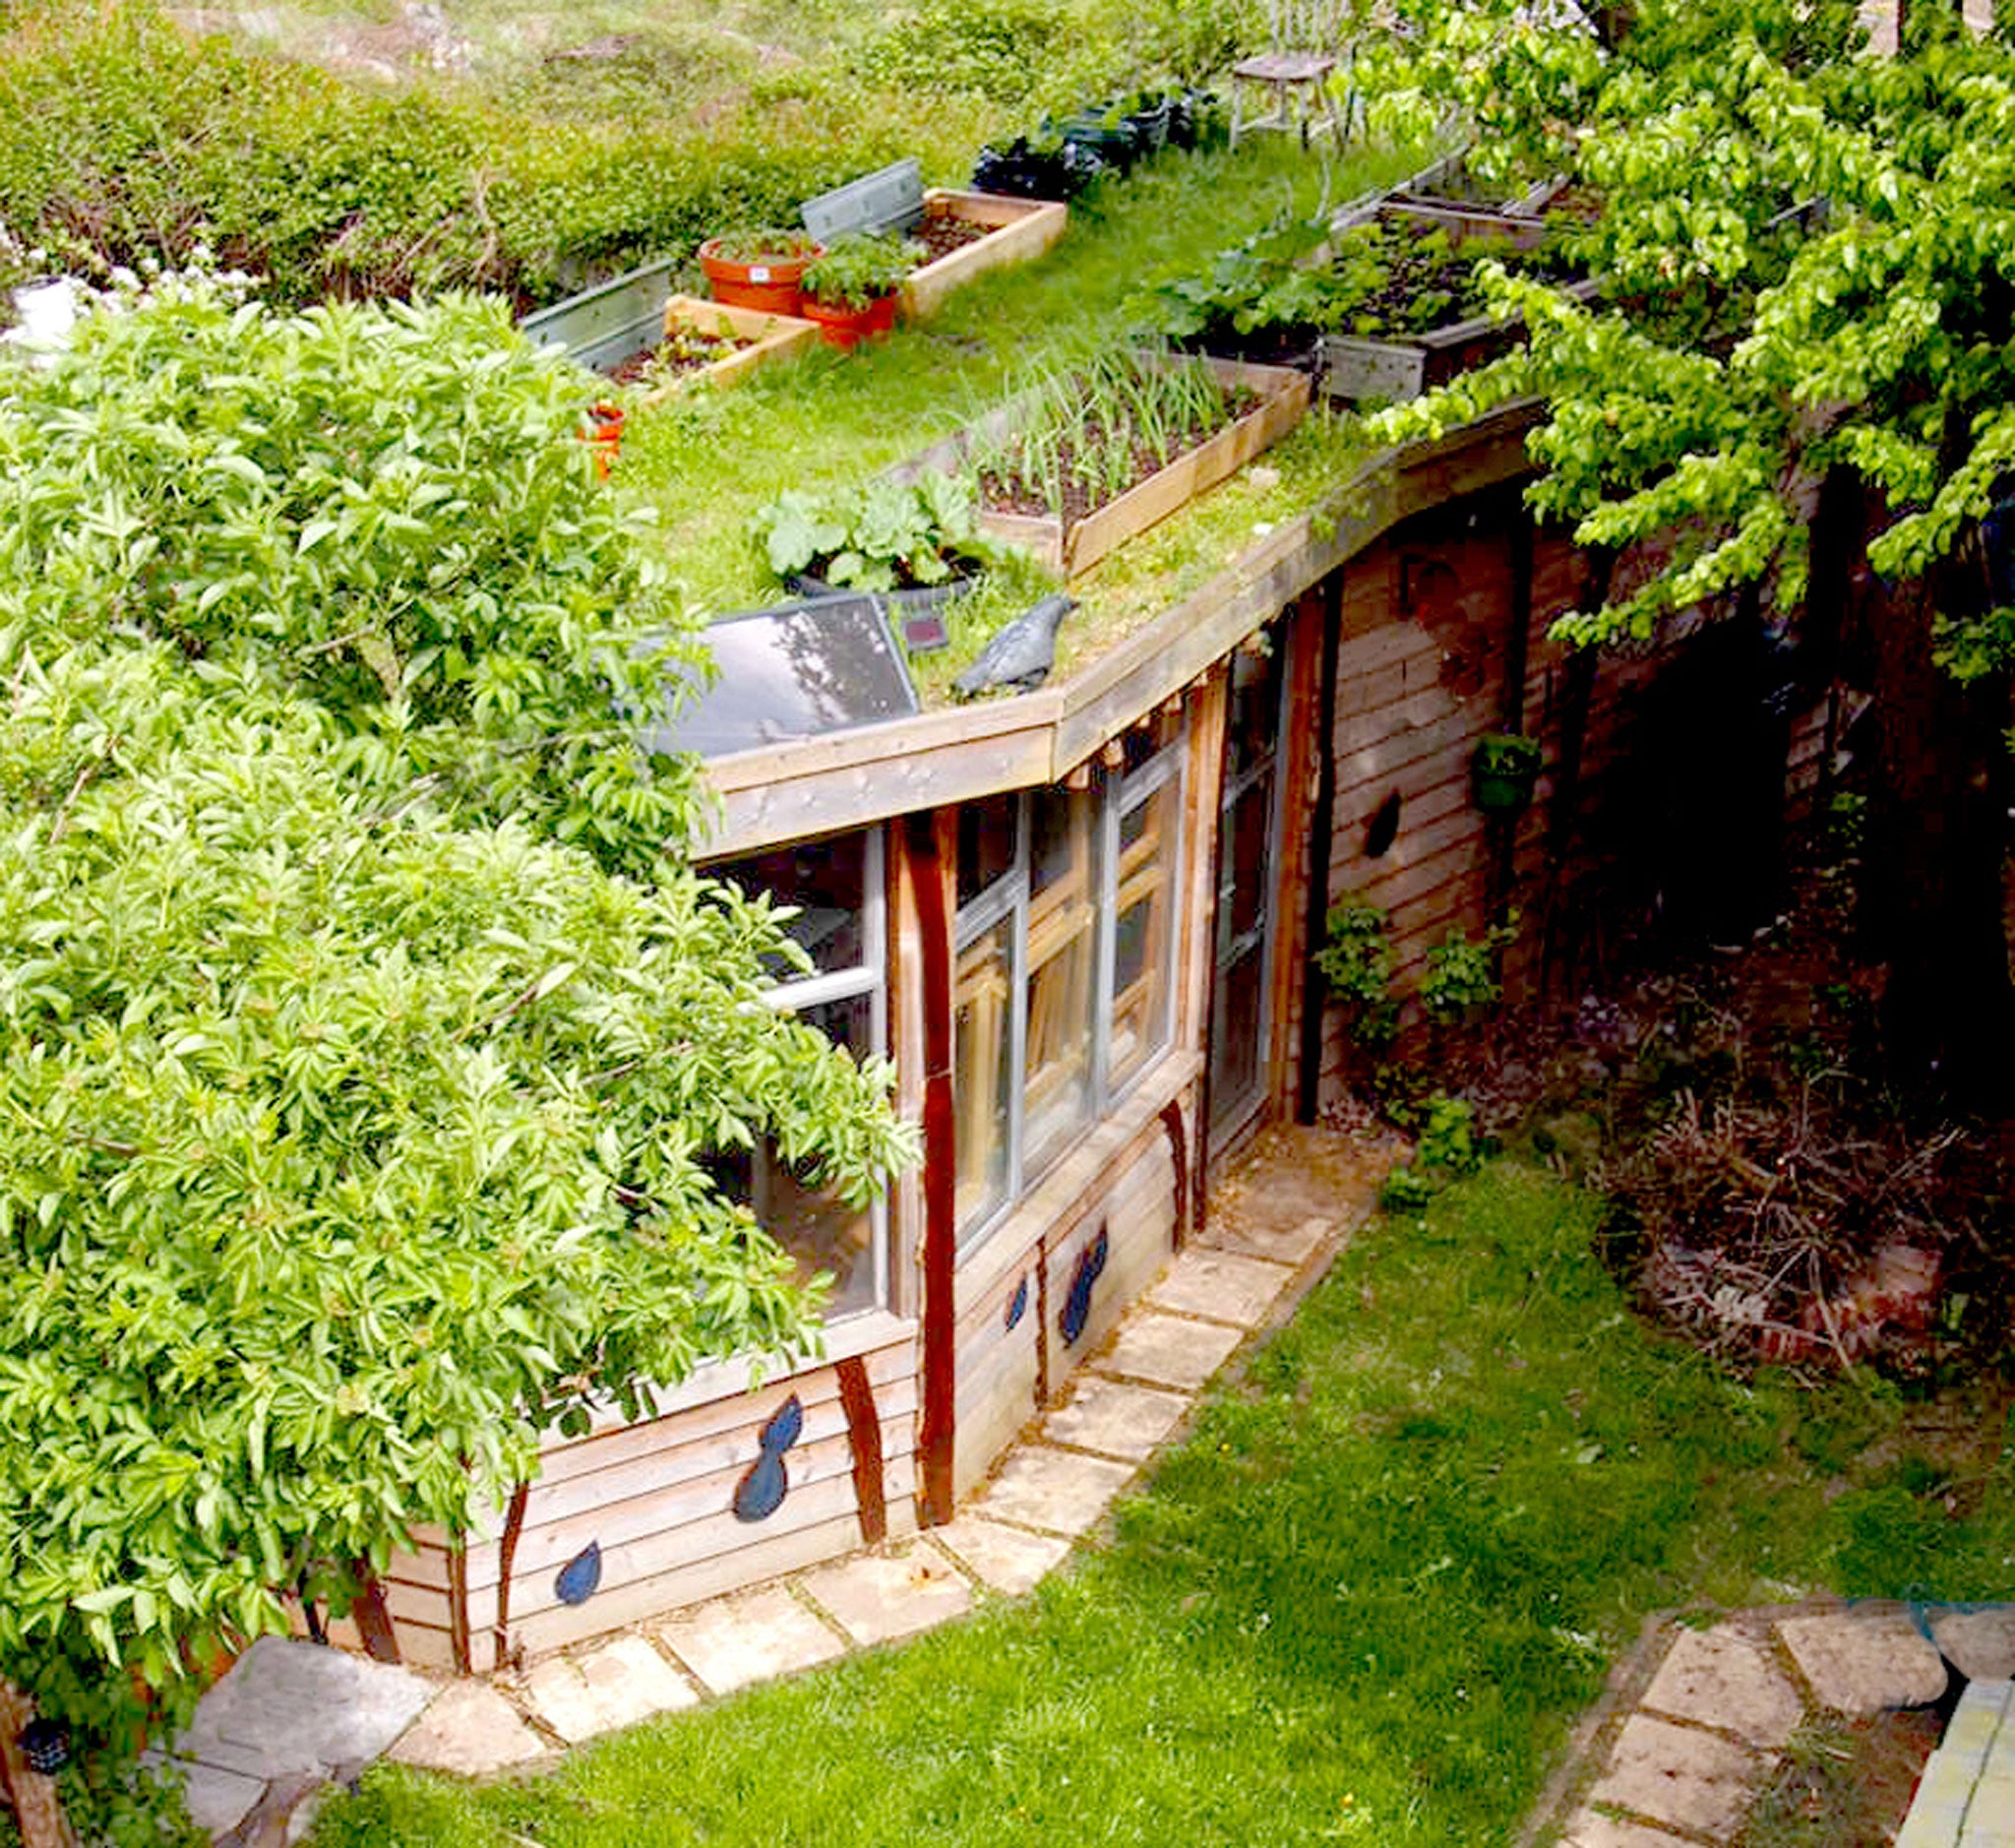 Winner of the 2014 Shed of the Year competition